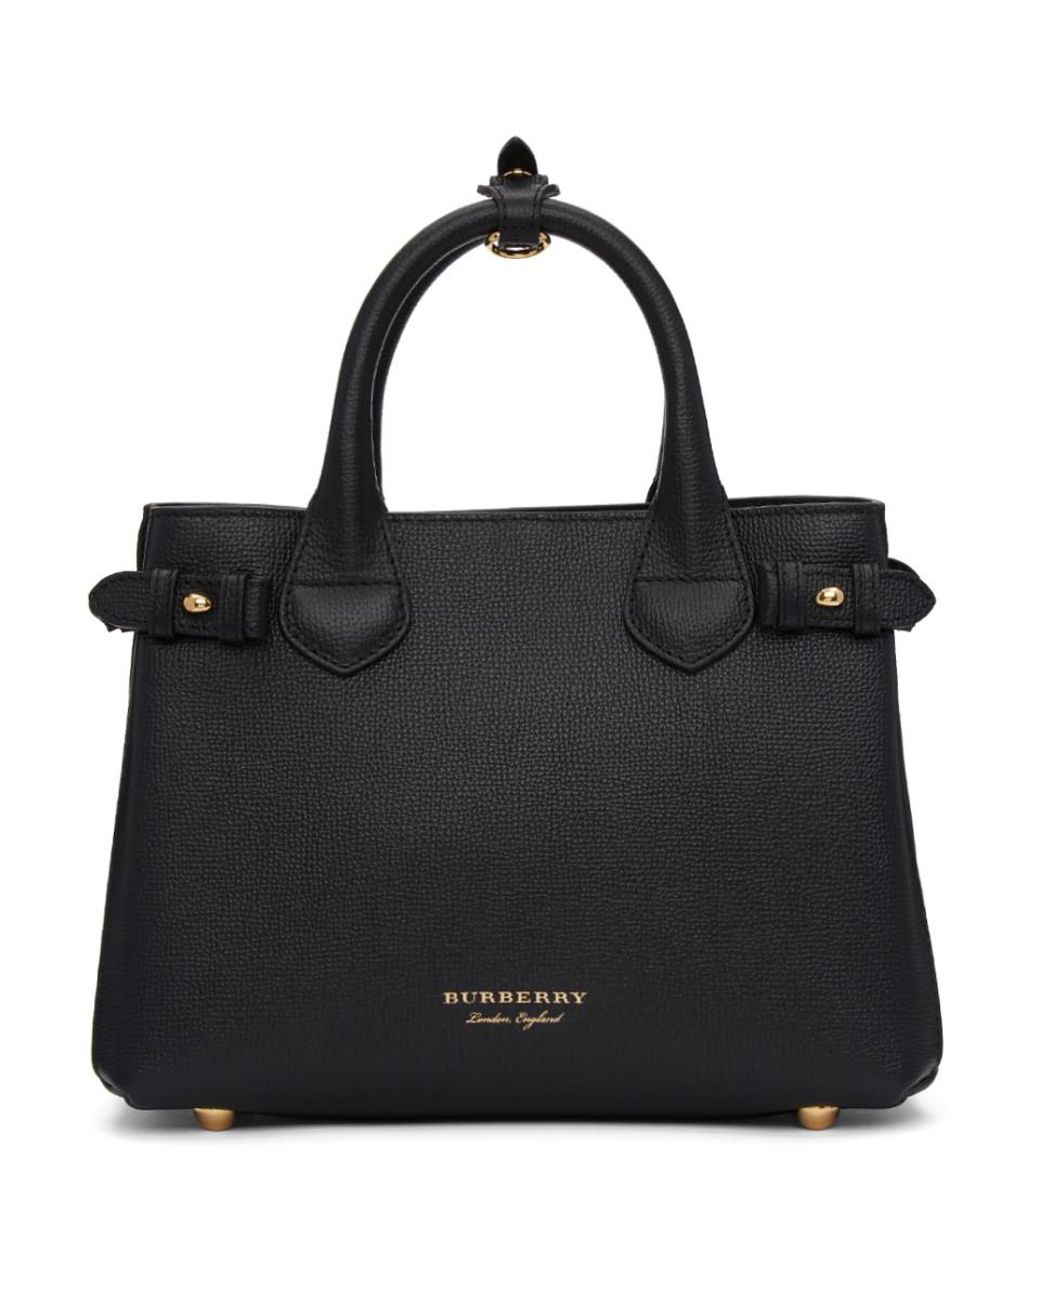 Share 72+ burberry black bag - in.cdgdbentre